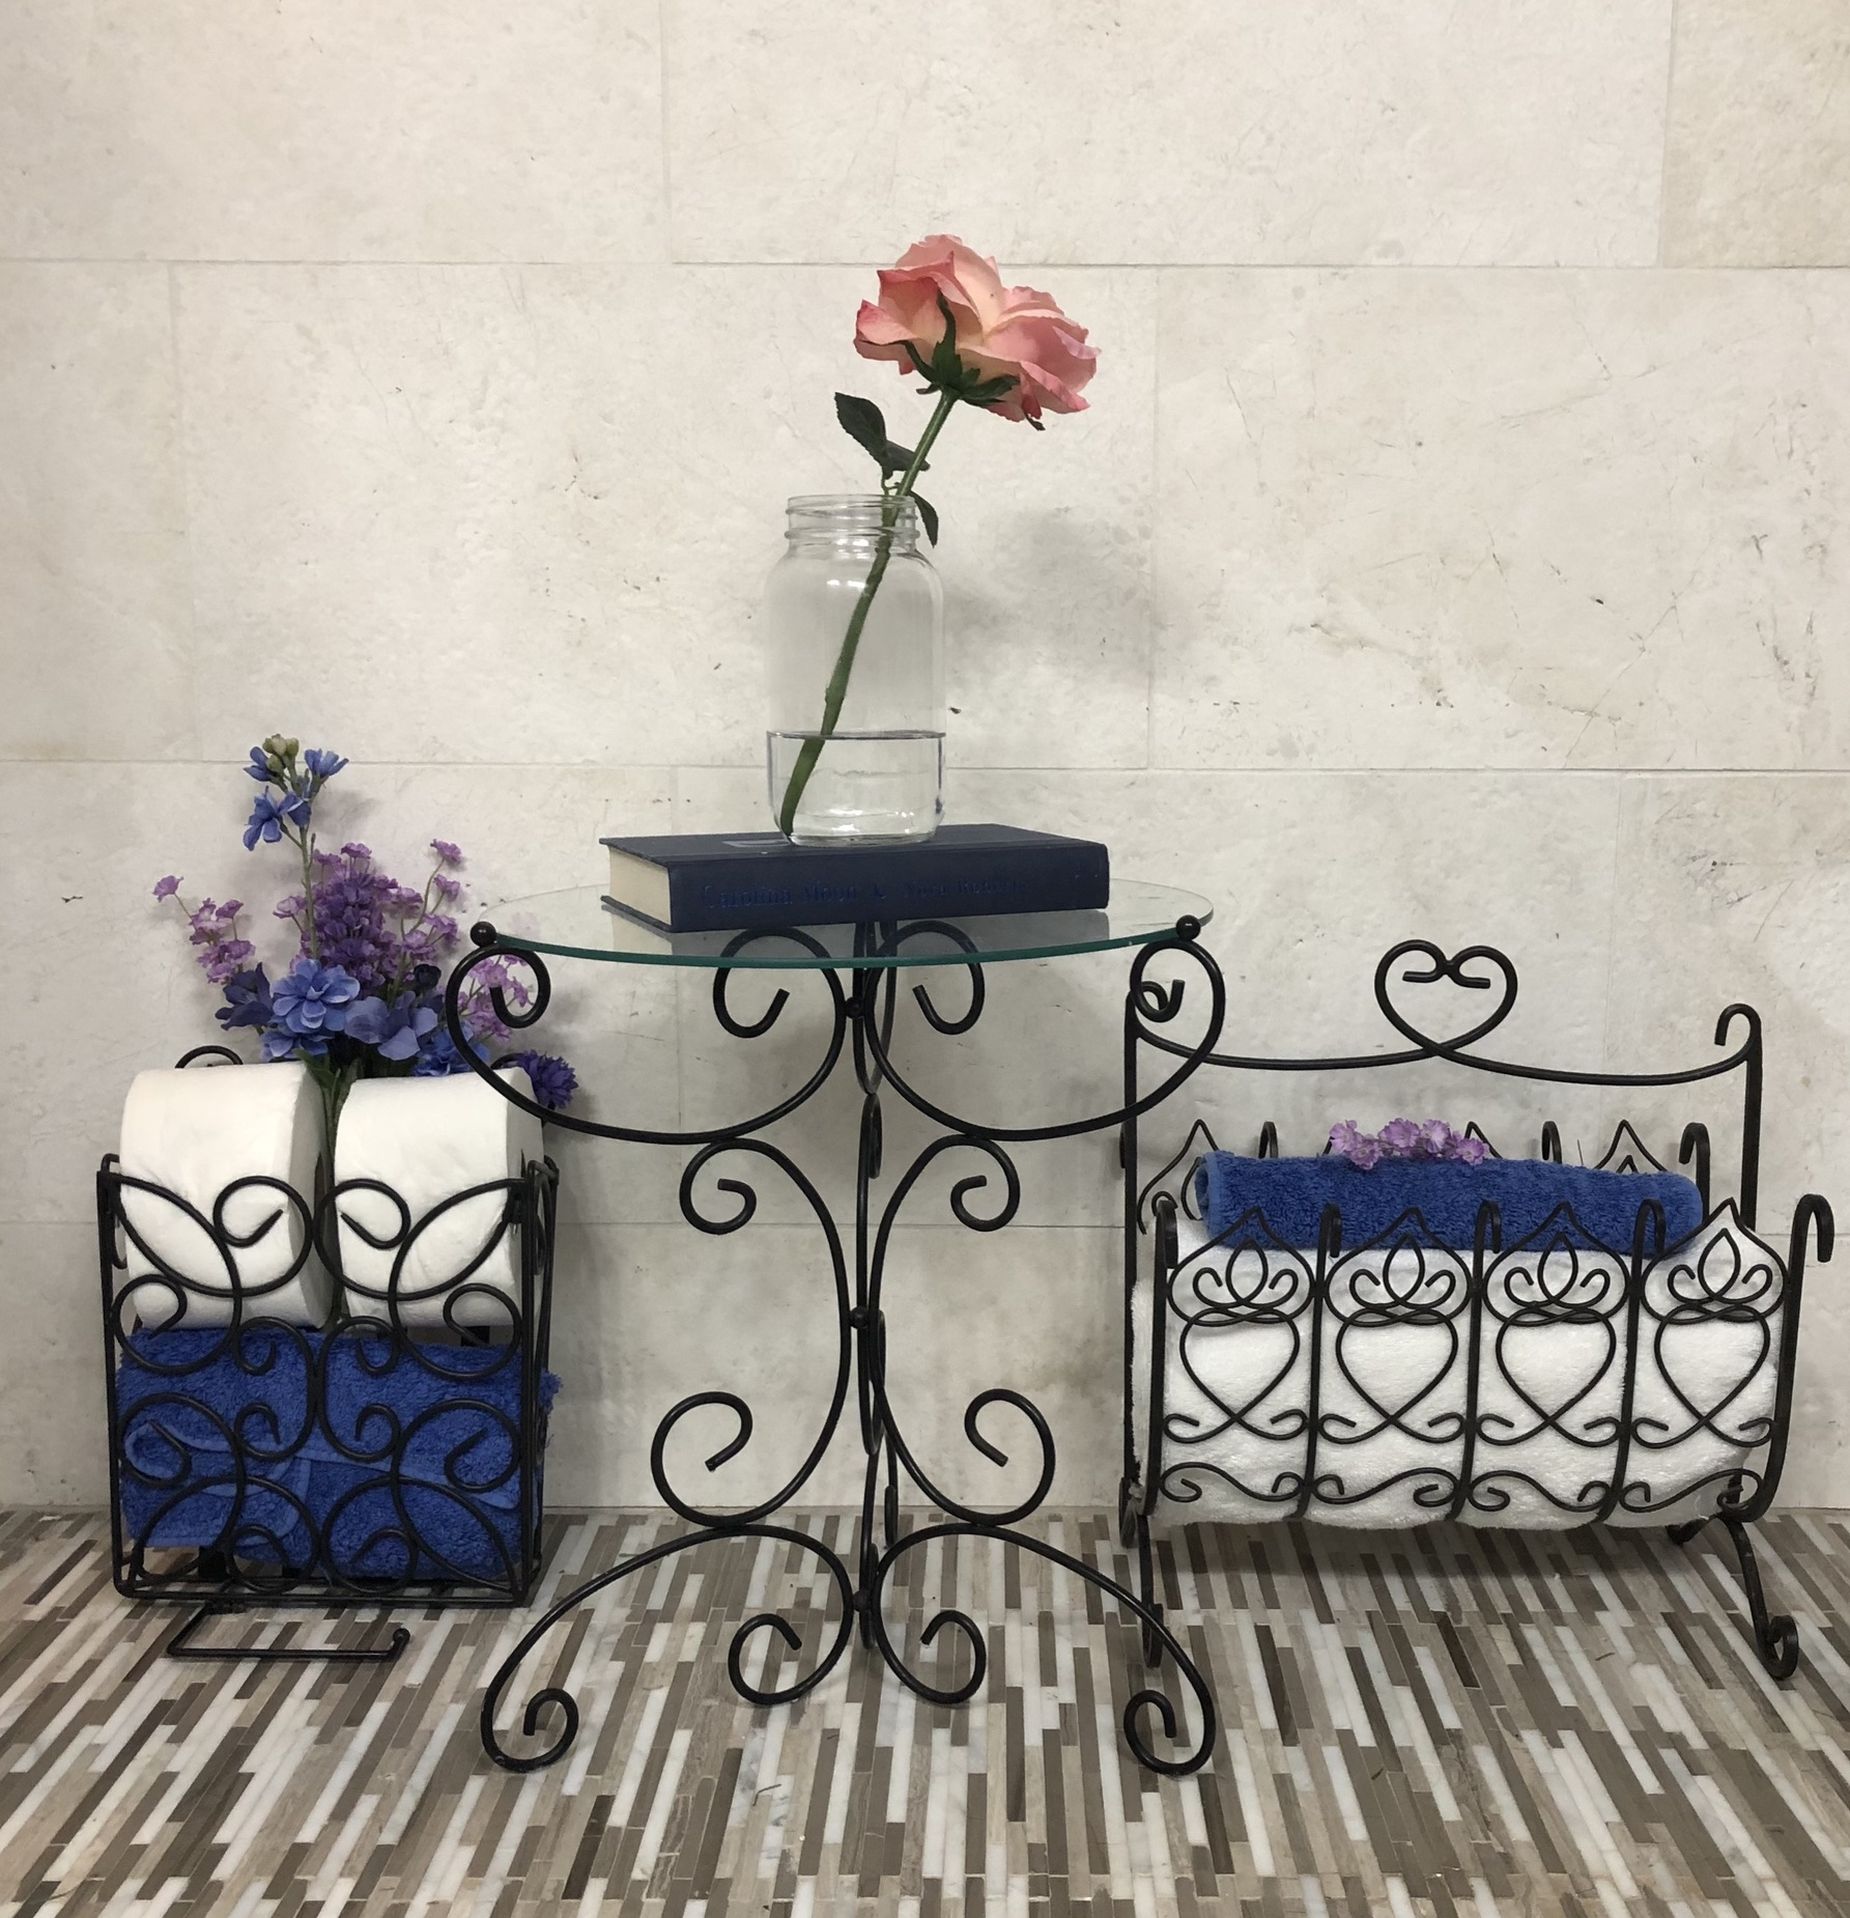 Three Fabulous Wrought Iron Items ... Small Table, Magazine Rack And Toilet Paper Holder With Storage ... Check Out My Other Offers Too